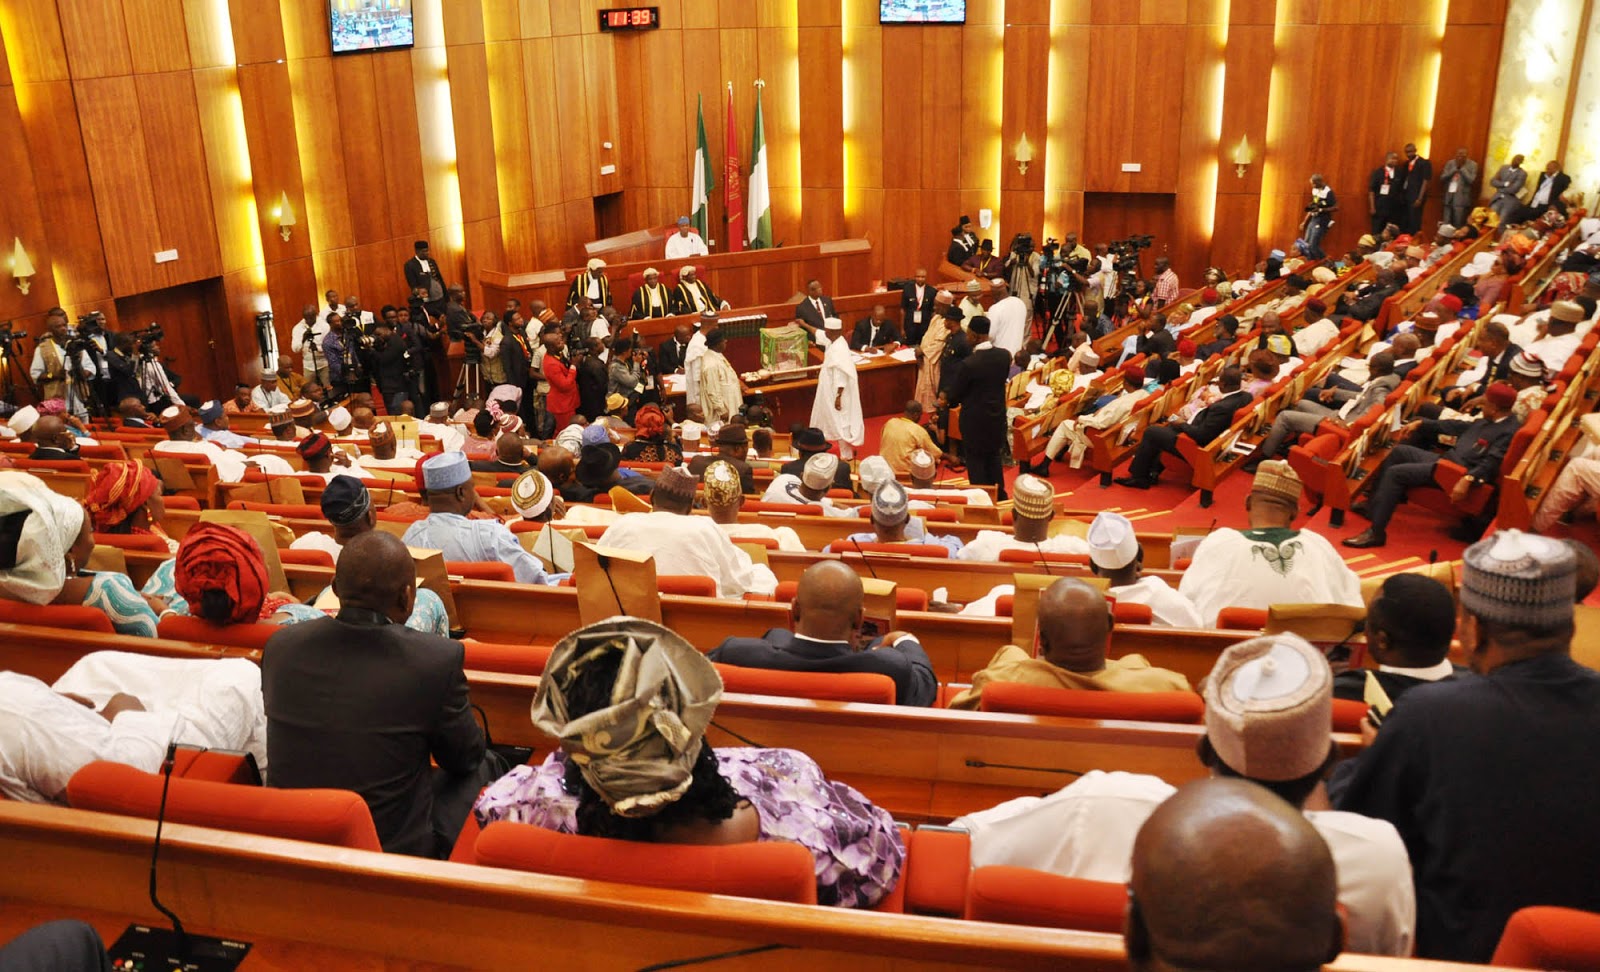 Senate Agrees to 35-years as Minimum Age for President